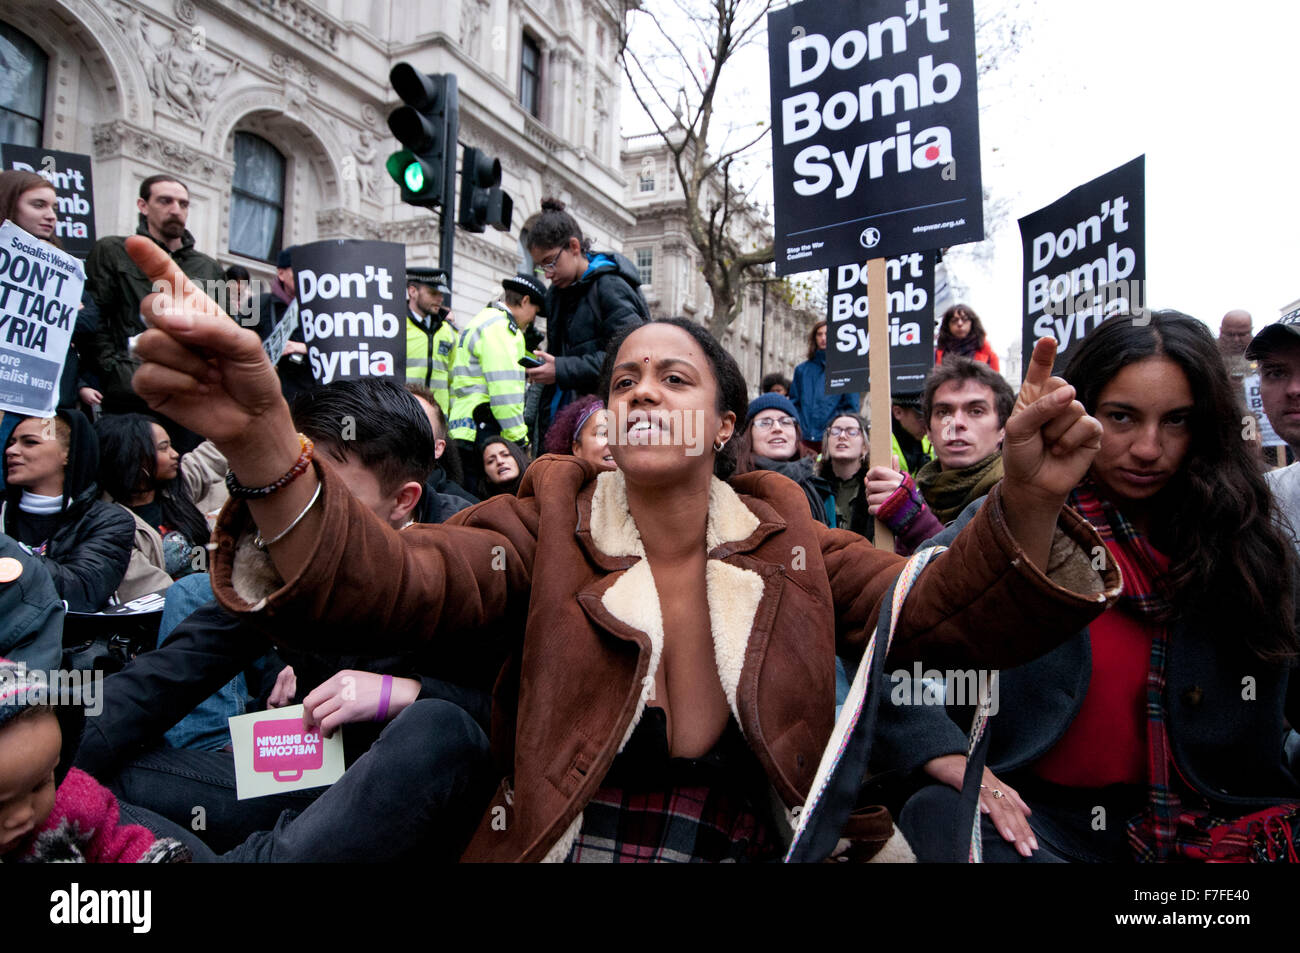 Don't Attack Syria anti-war protest and march outside Downing Street London by Stop the War Nov 28th 2015 Stock Photo